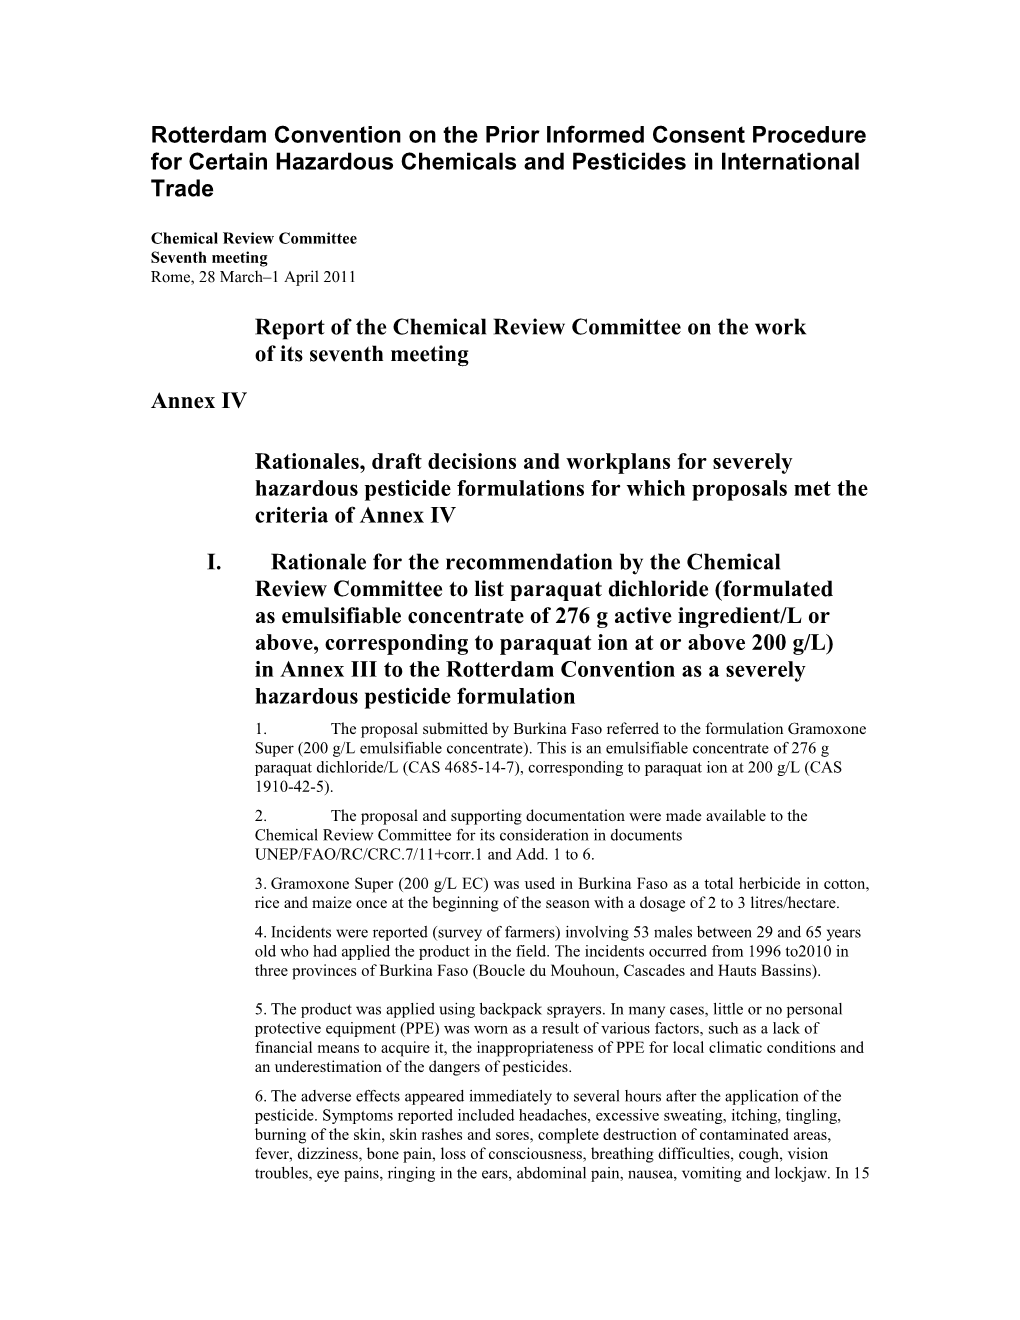 Rotterdam Convention on the Prior Informed Consent Procedure for Certain Hazardous Chemicals